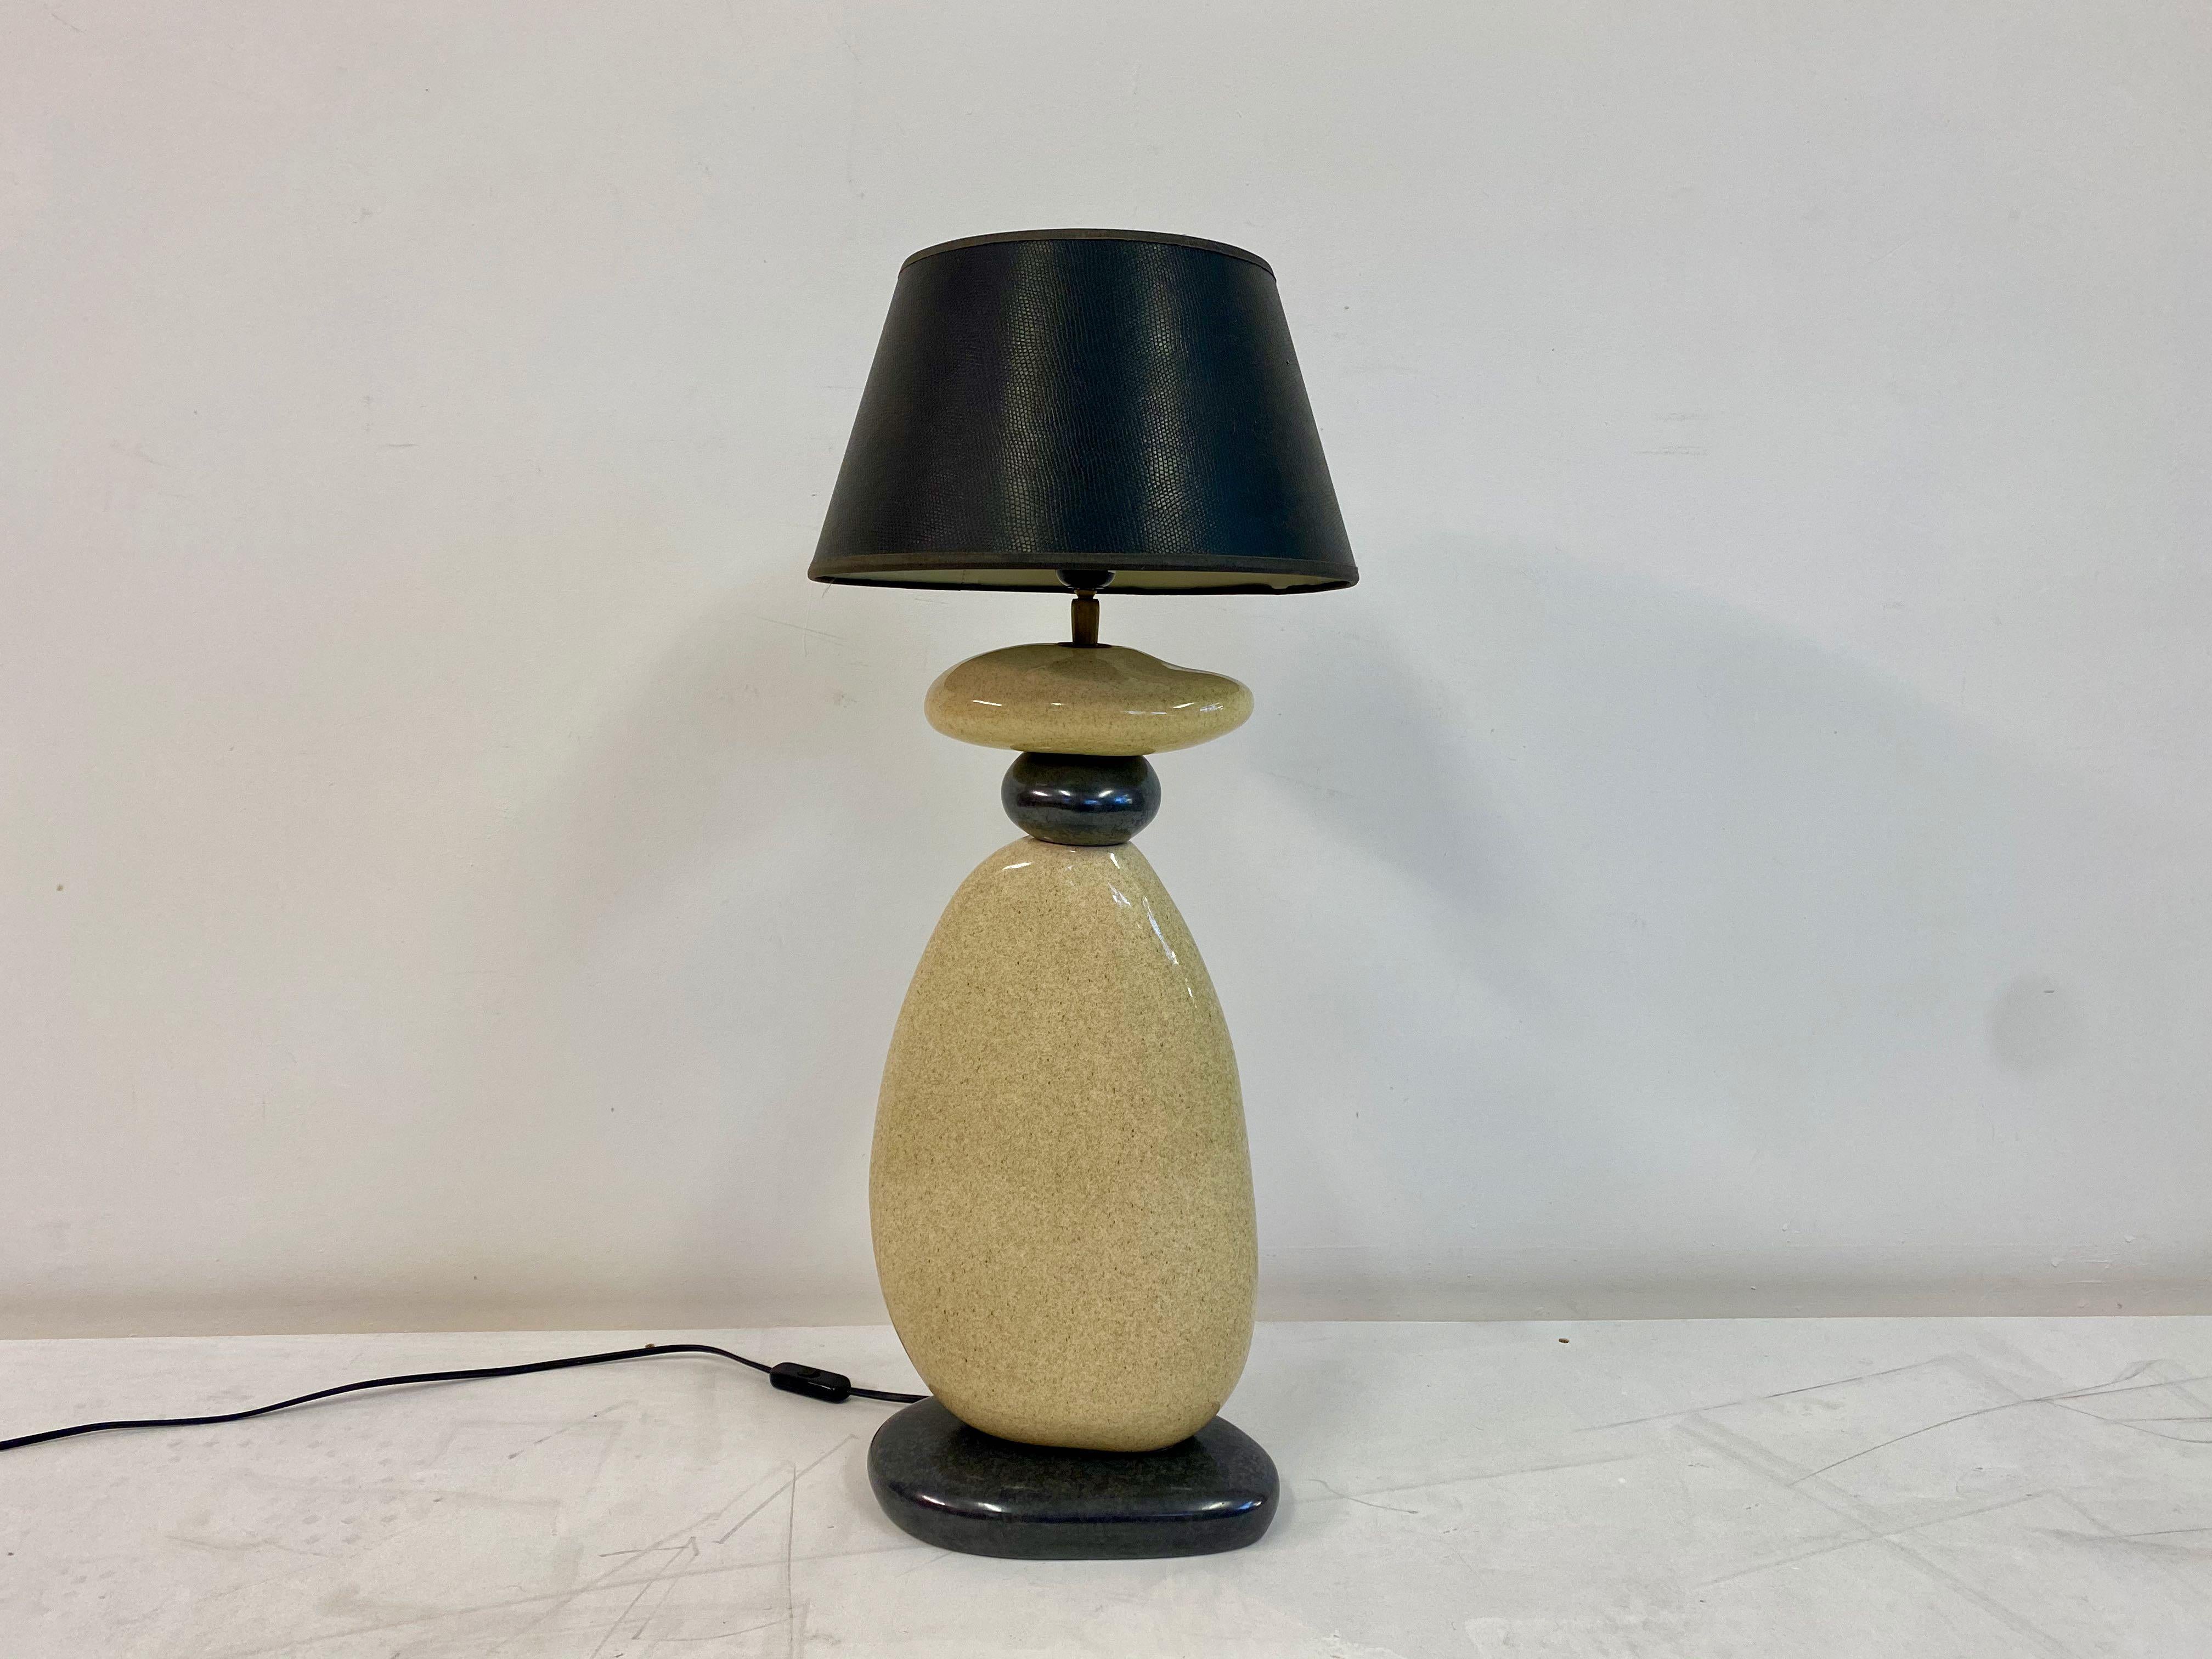 Ceramic pebble lamp

By Francois Chatain

Large size

Travertine and marble effect ceramic

Shades not included

France 1980s.